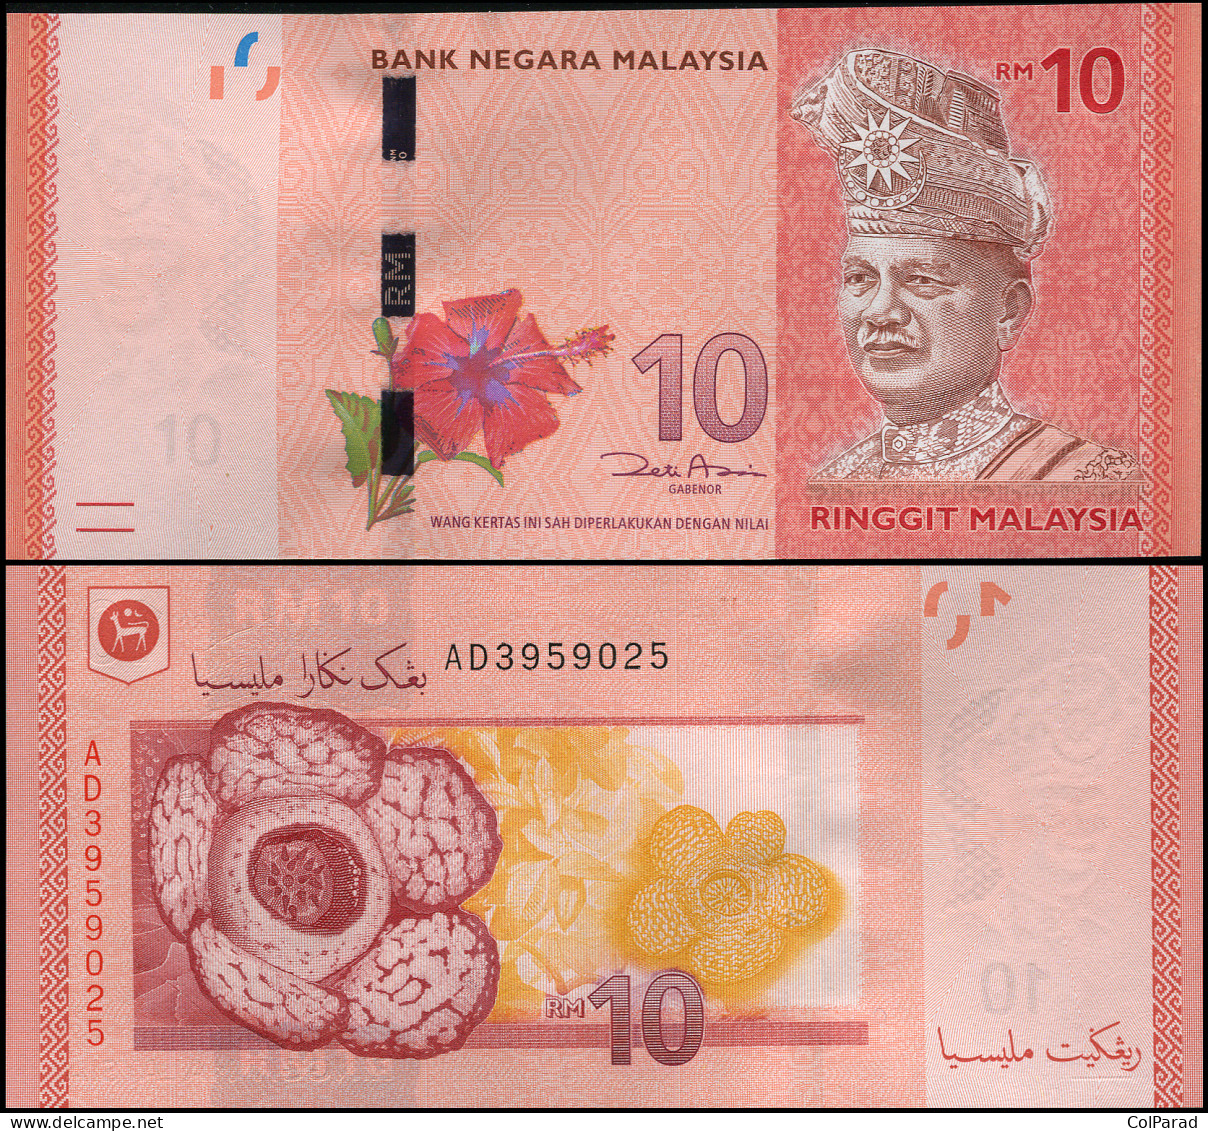 MALAYSIA 10 RINGGIT - ND (2012) - Paper Unc - P.53a Banknote - Malaysia